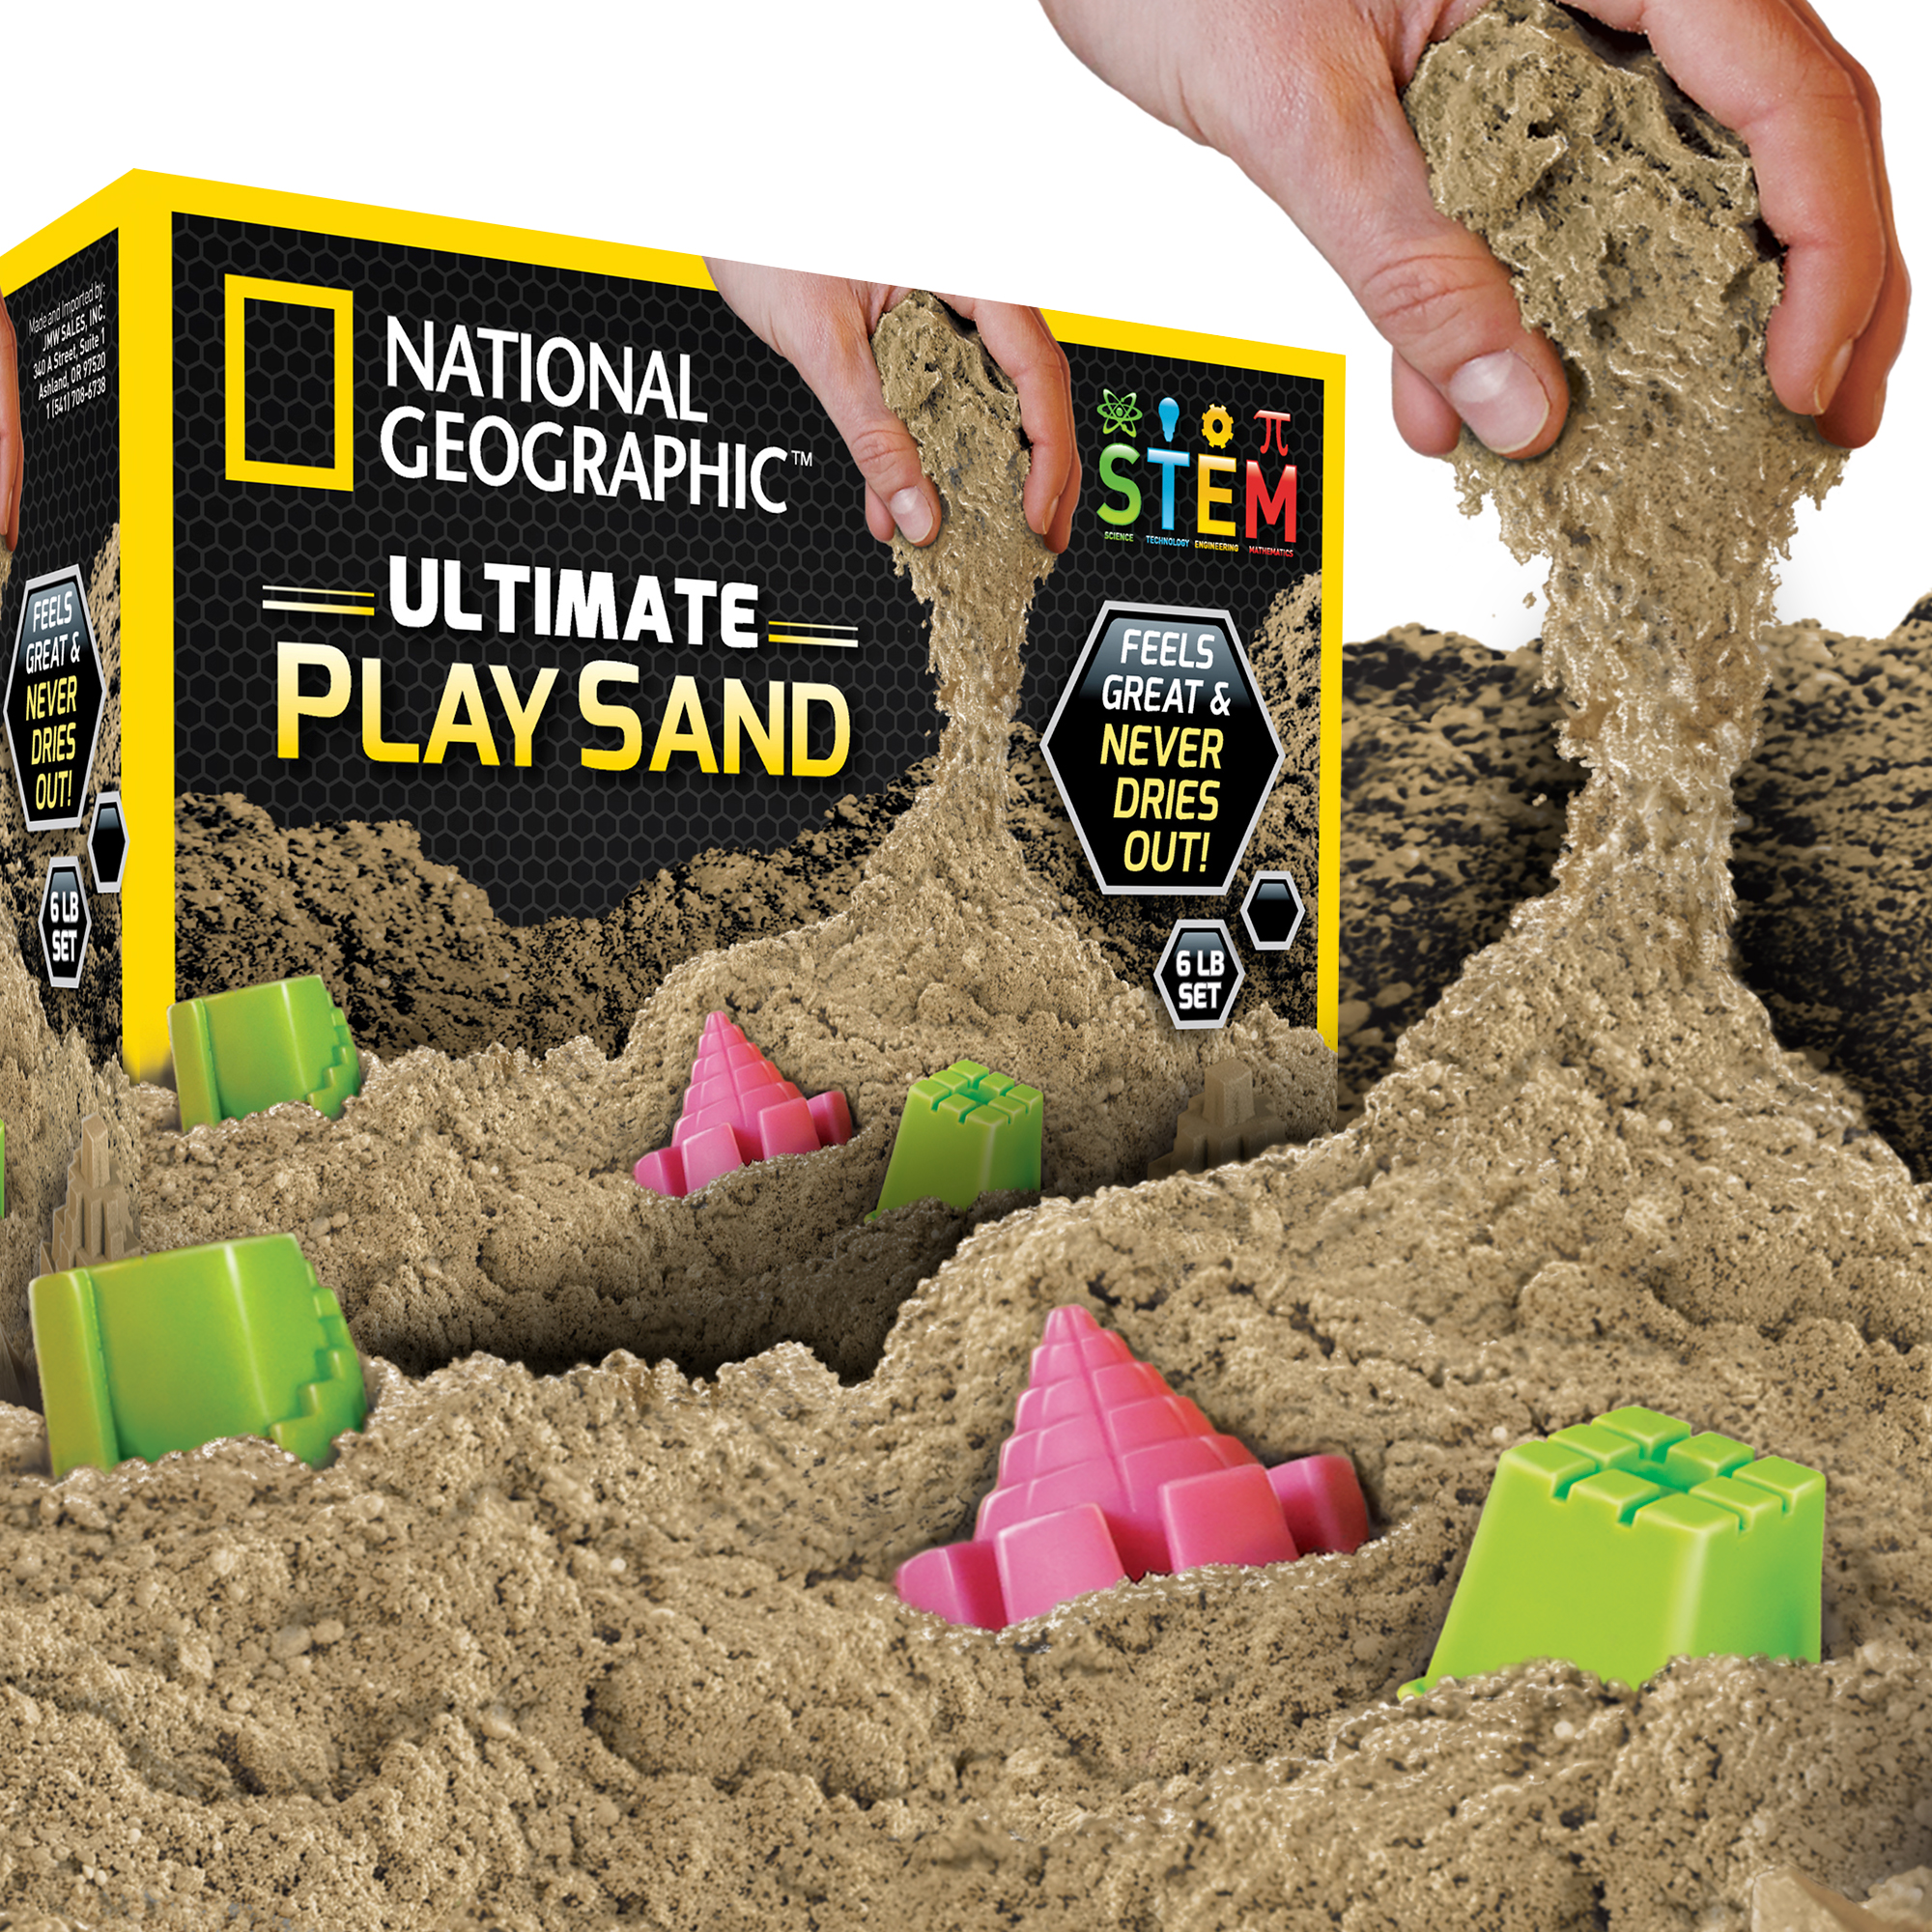 National Geographic Play Sand - 6 lbs of Sand with Castle Molds (Natural Sand color) - A Fun Sensory Sand Activity - image 1 of 7